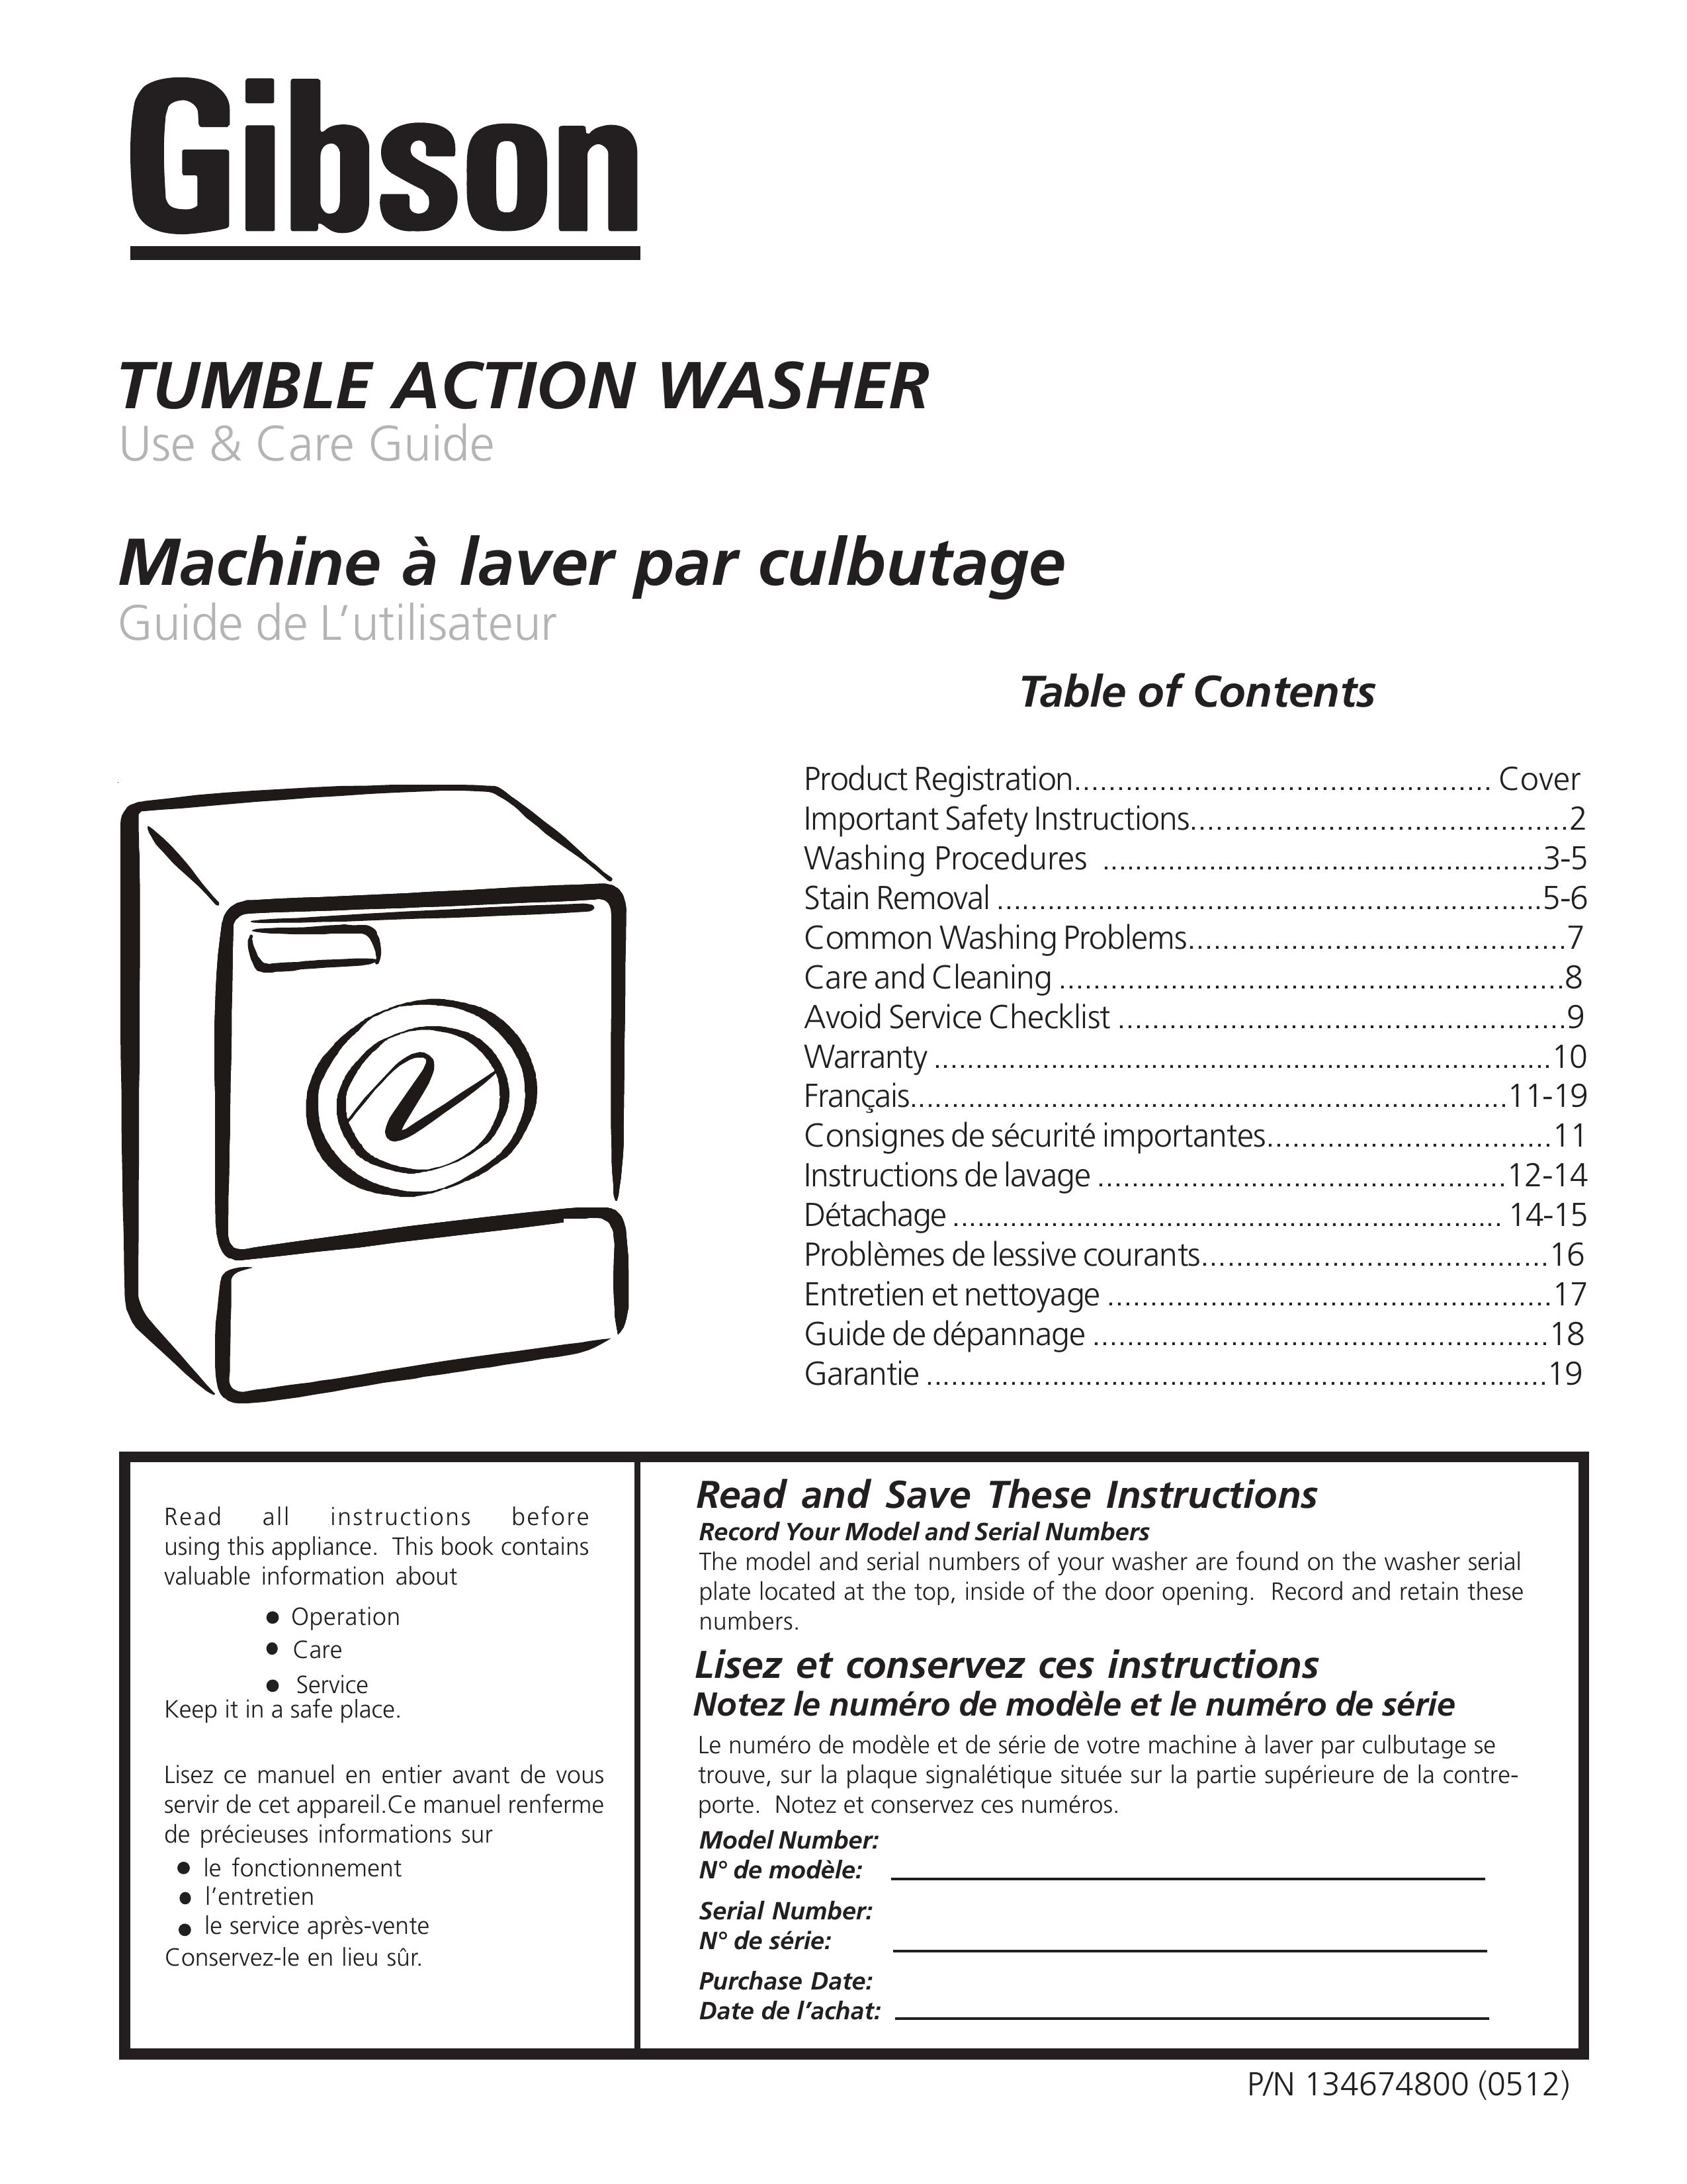 Electrolux - Gibson 134674800 Washer User Manual